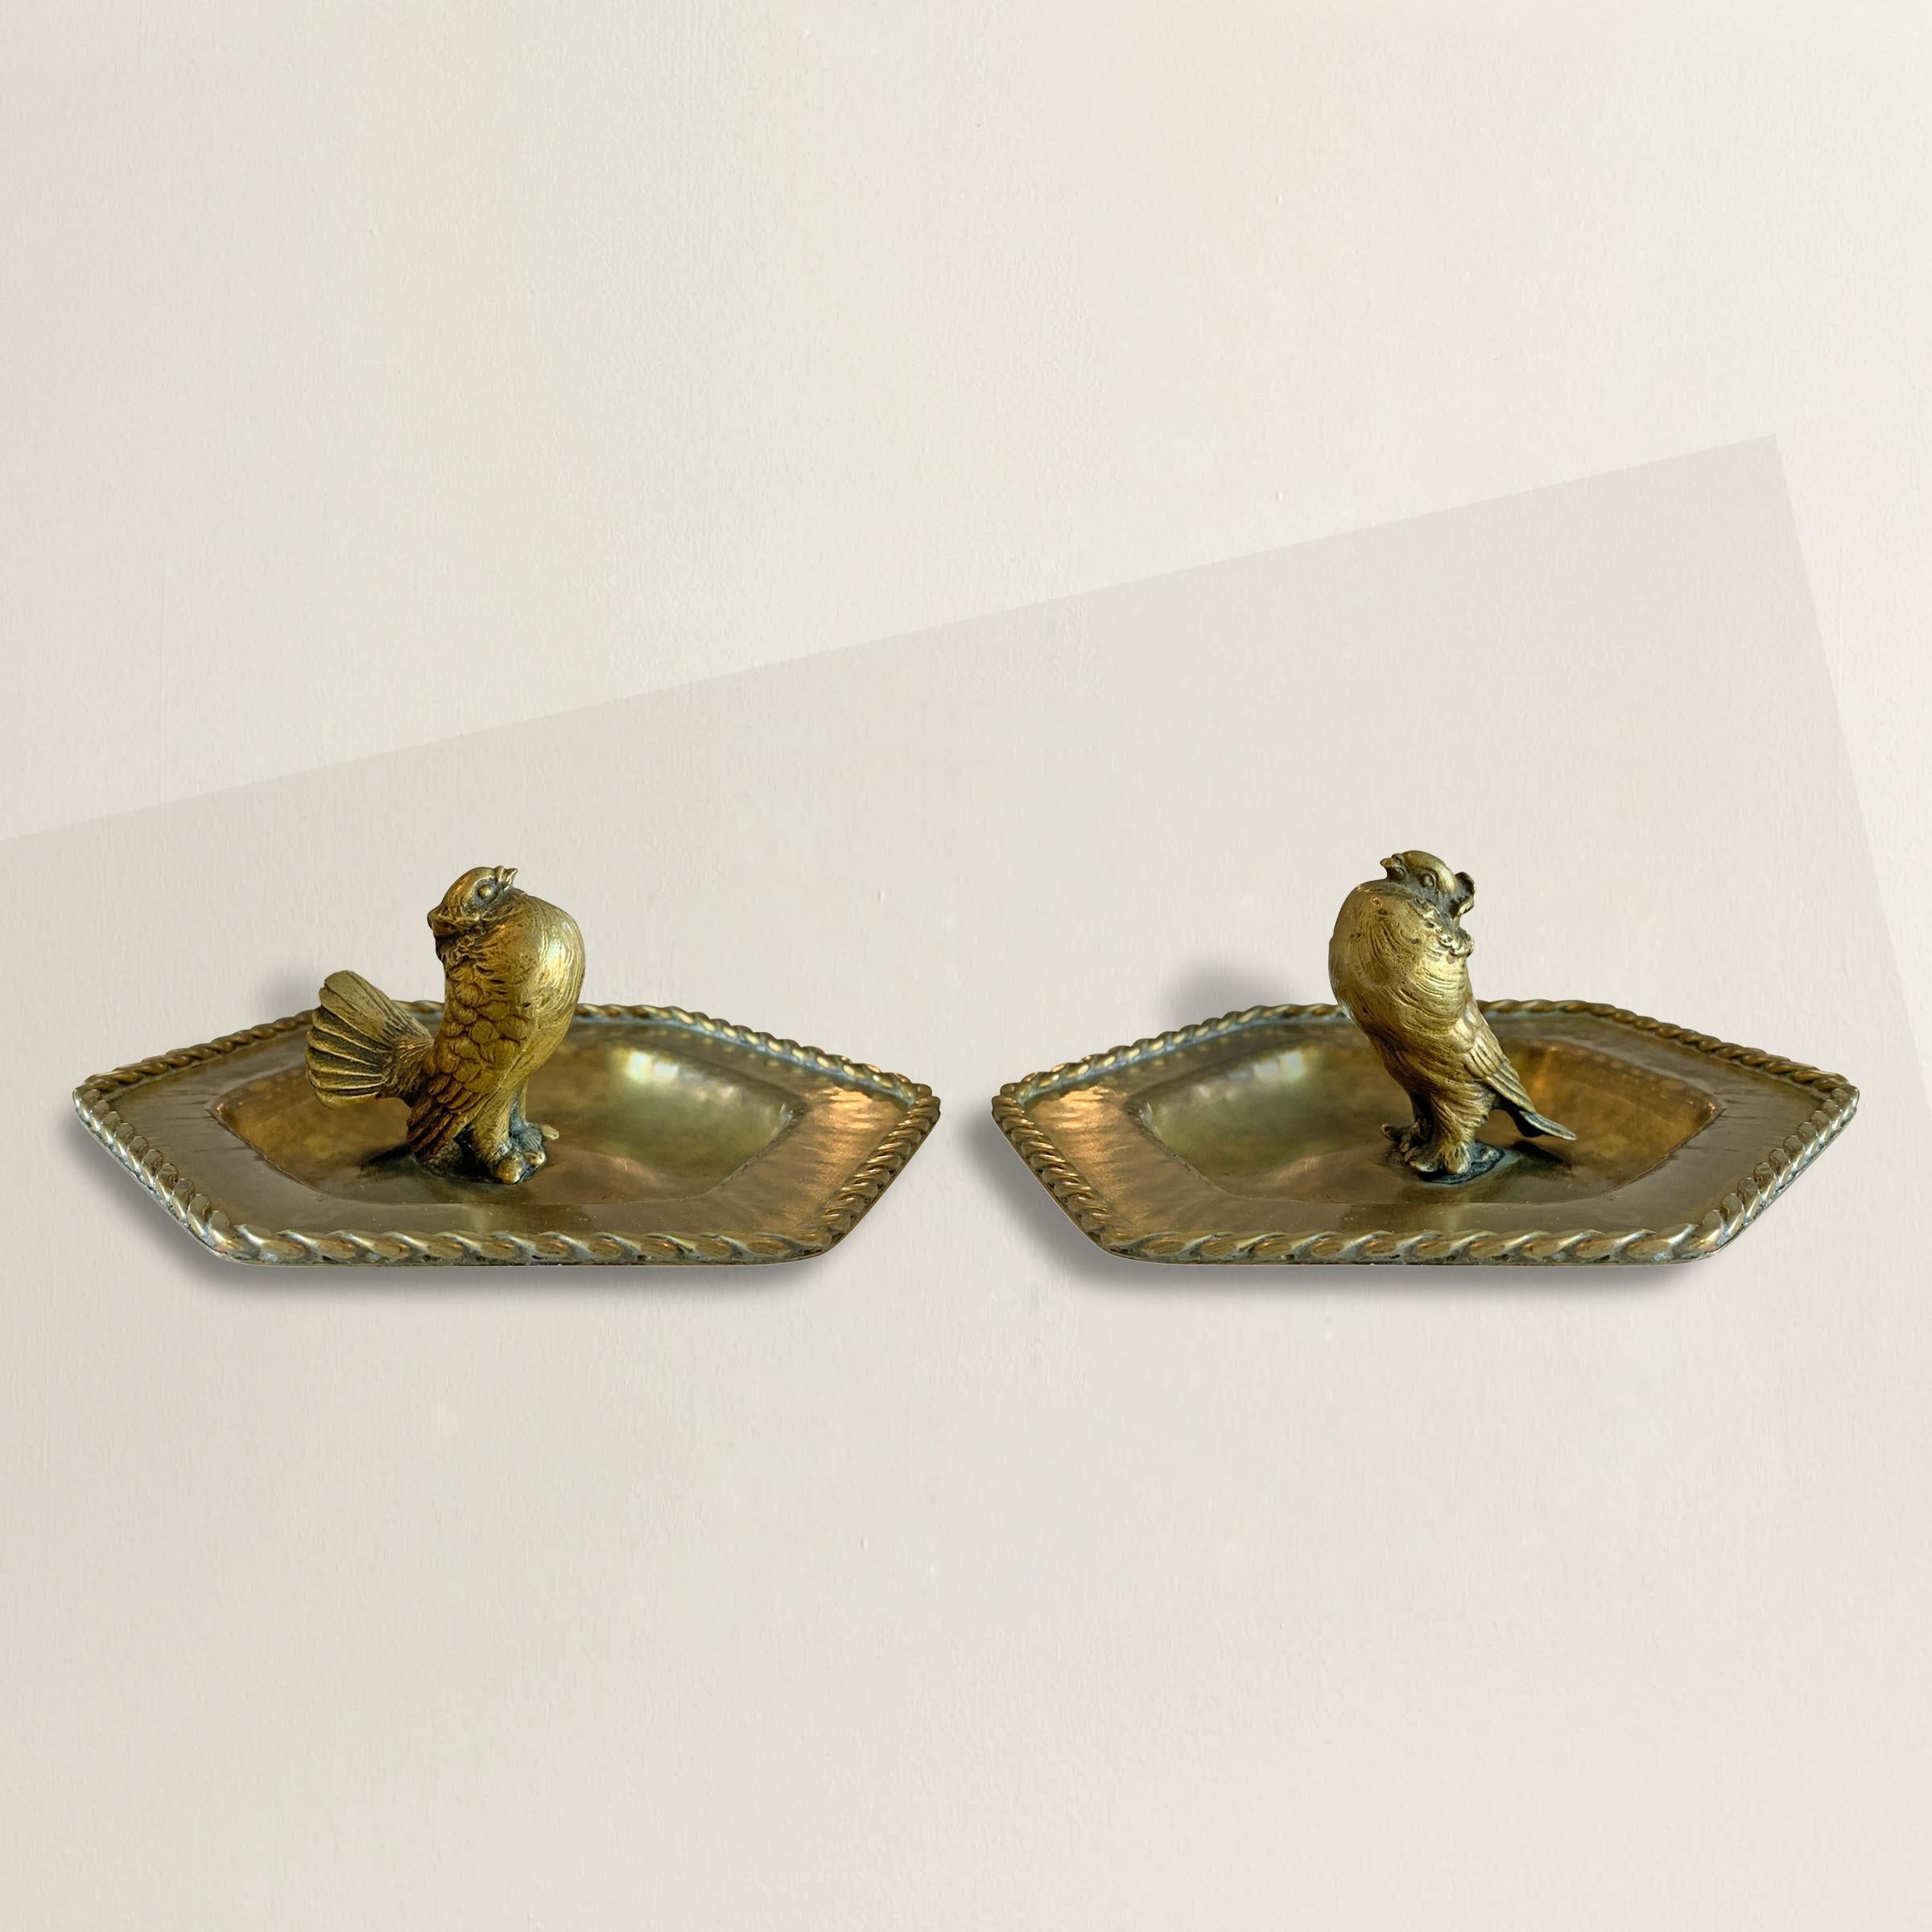 A charming pair of early 20th century English brass pigeon catchalls, one with a puffed-up male pigeon courting the female pigeon on the other. These are perfect for catching the keys or coins on your entry table, or filled with anything else you're